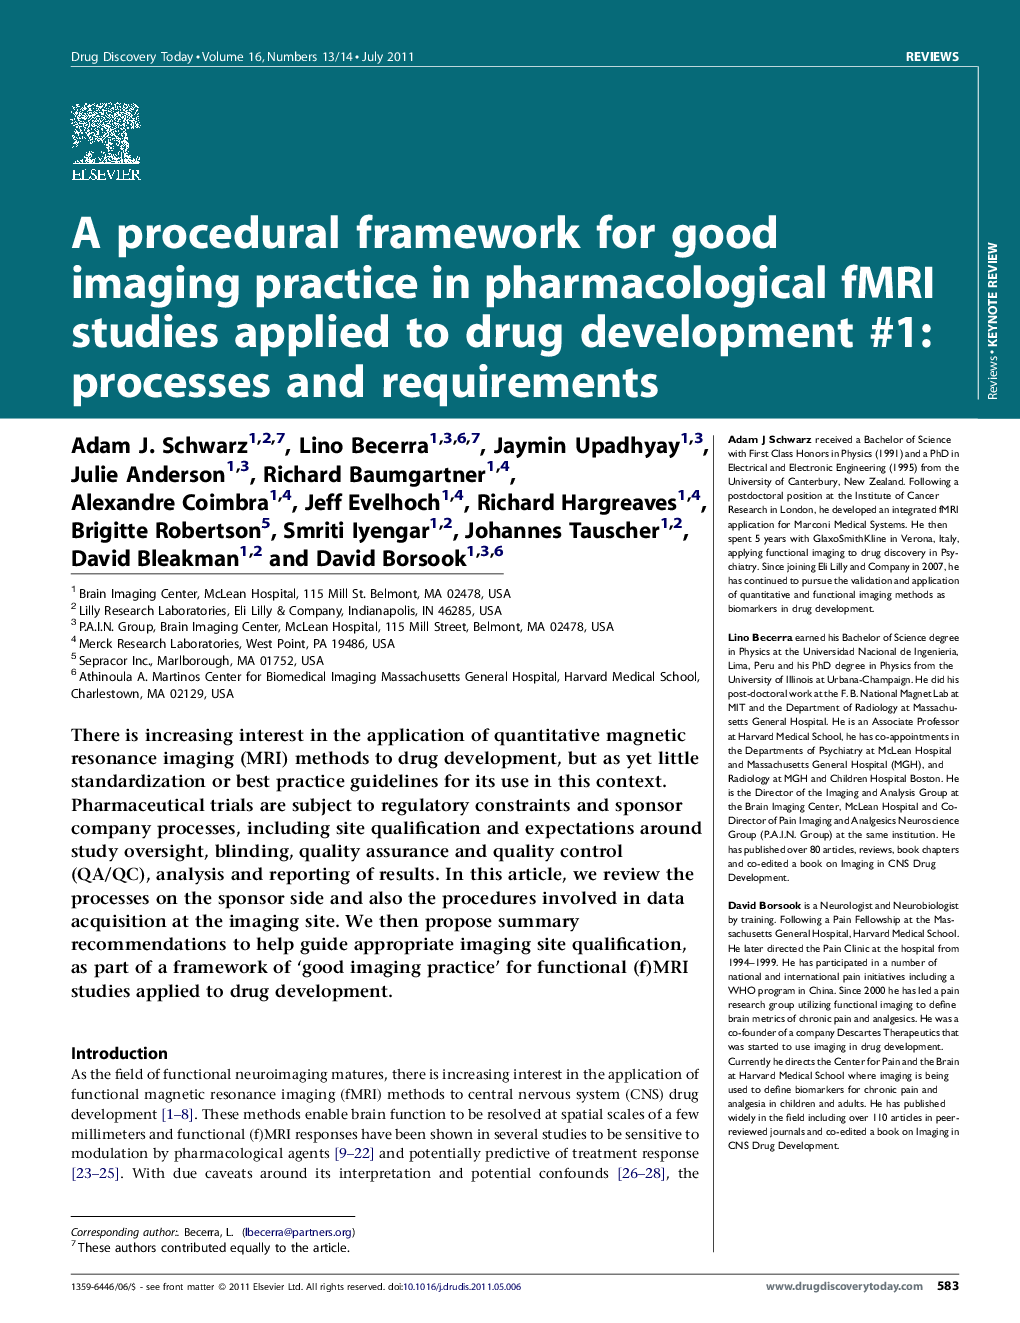 A procedural framework for good imaging practice in pharmacological fMRI studies applied to drug development #1: processes and requirements